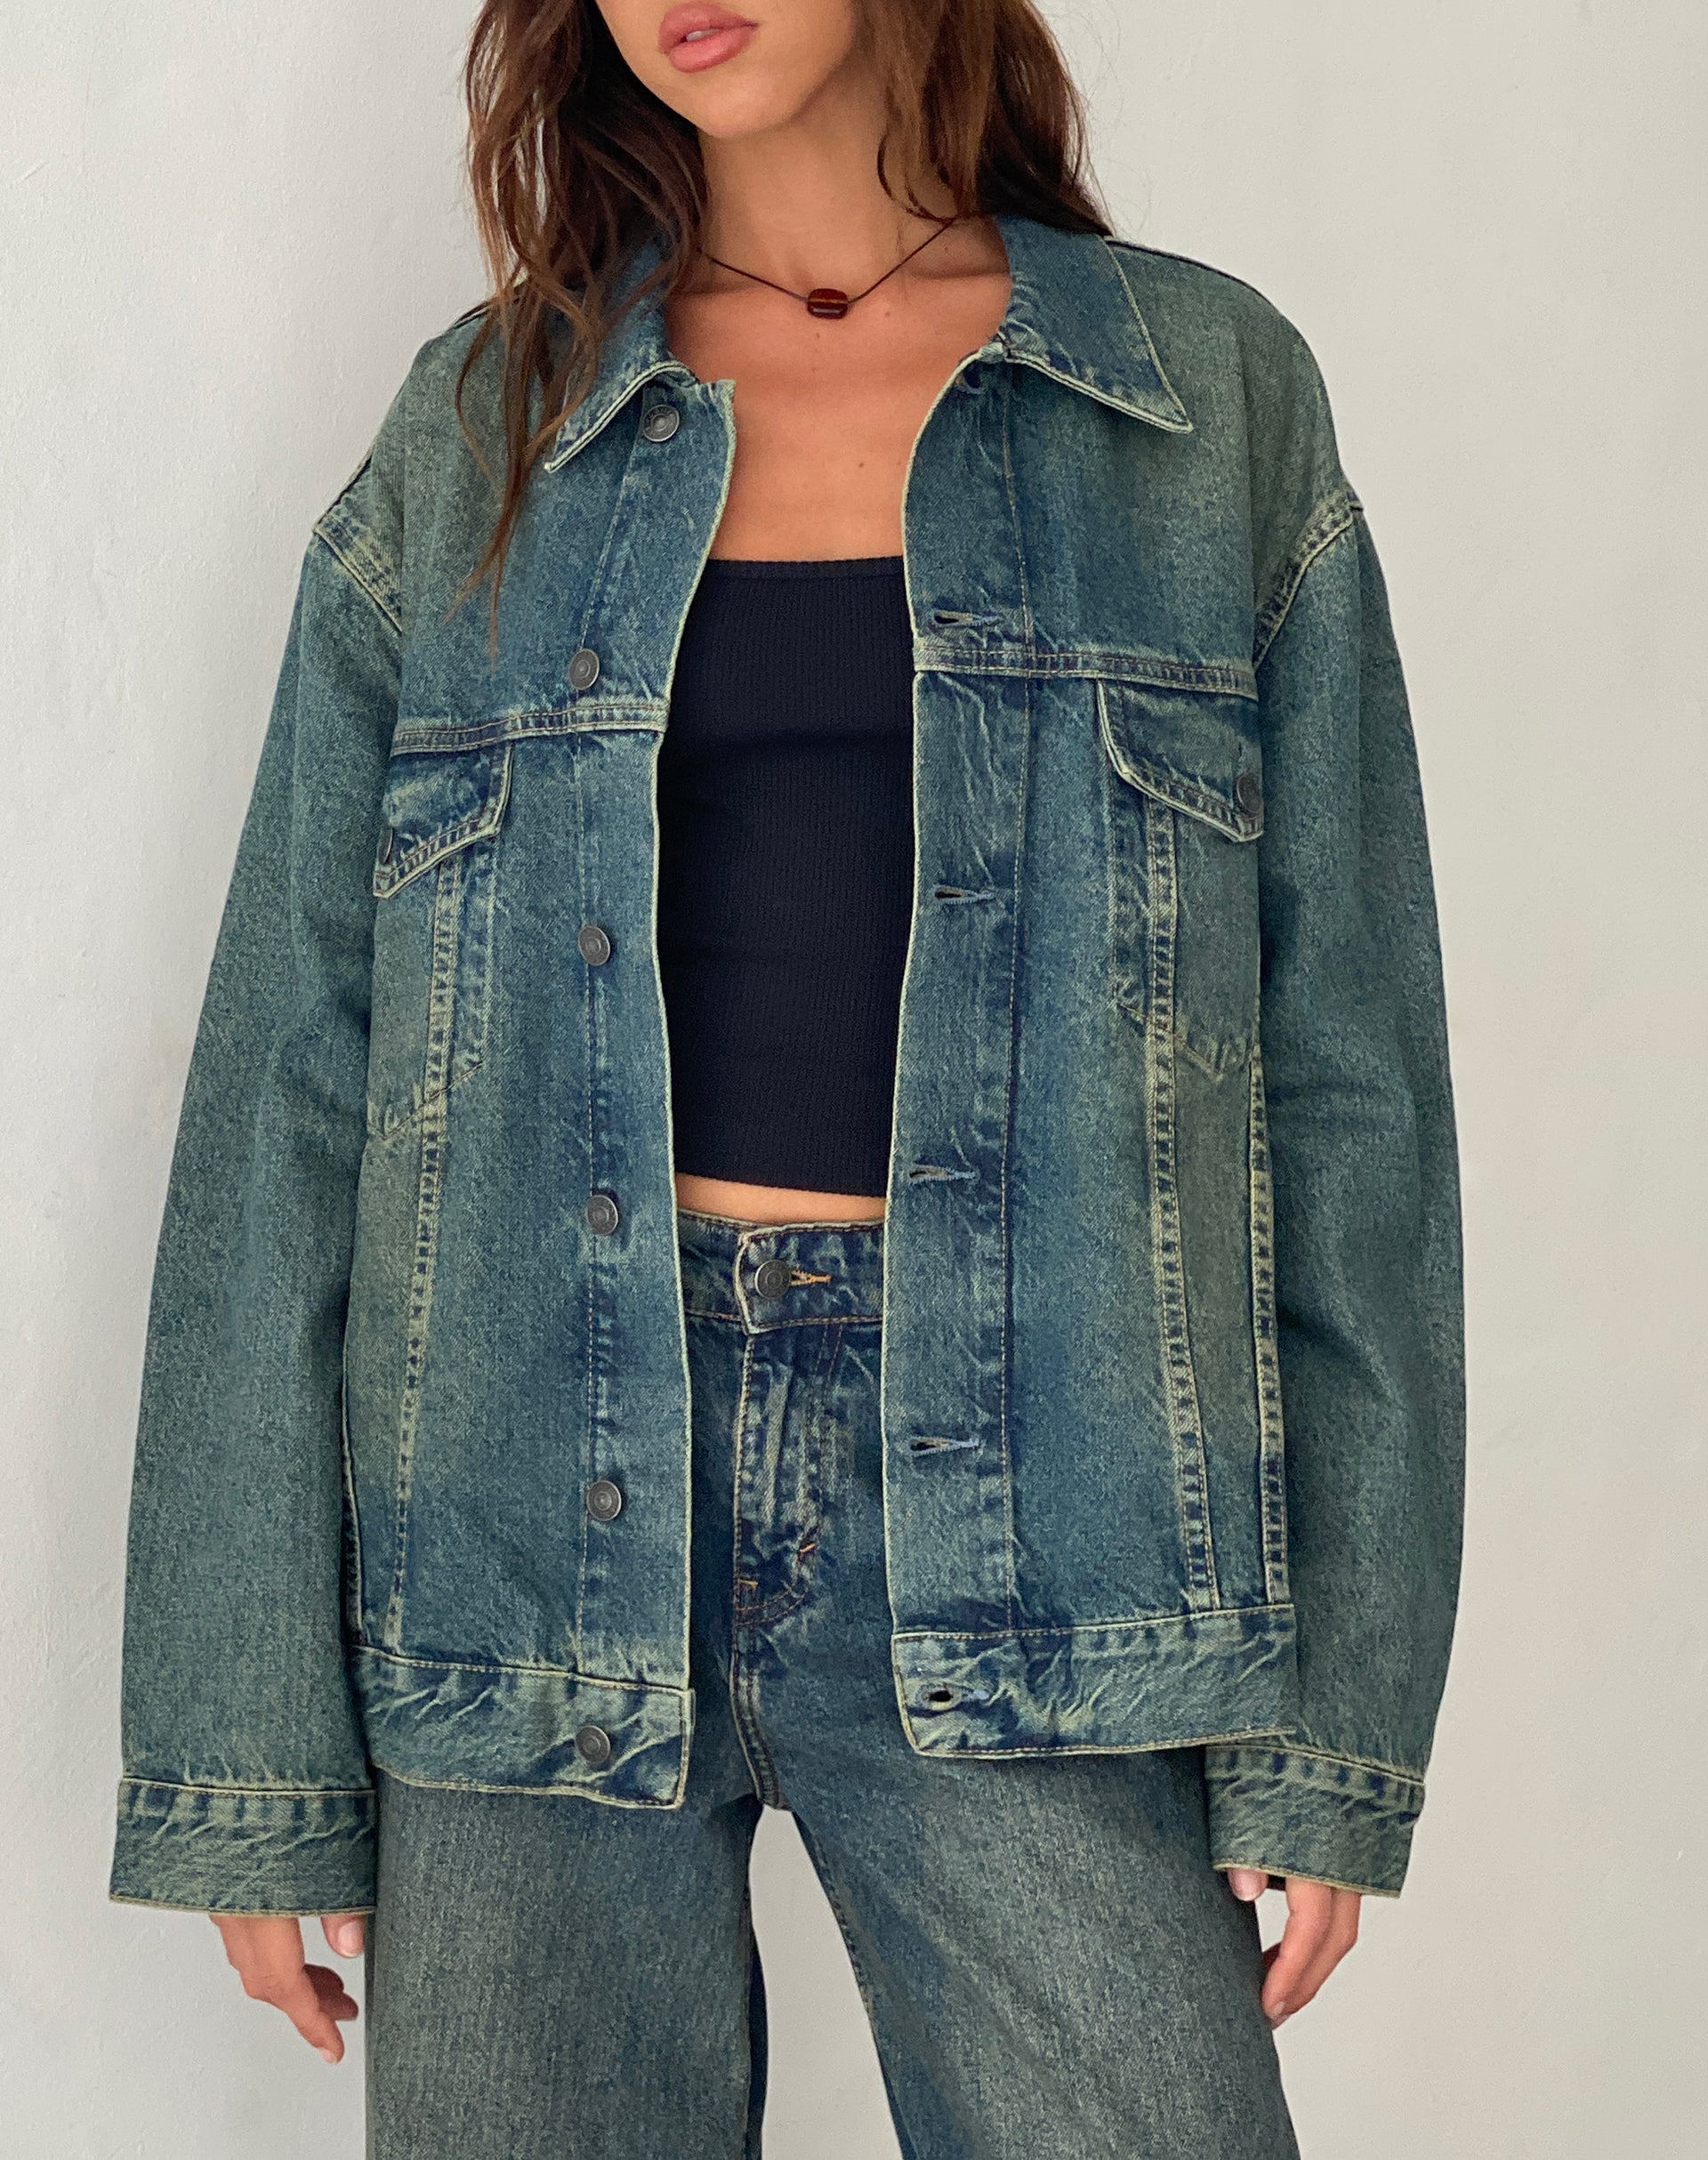 BDG Toni Denim Moto Jacket | Urban Outfitters Mexico - Clothing, Music,  Home & Accessories